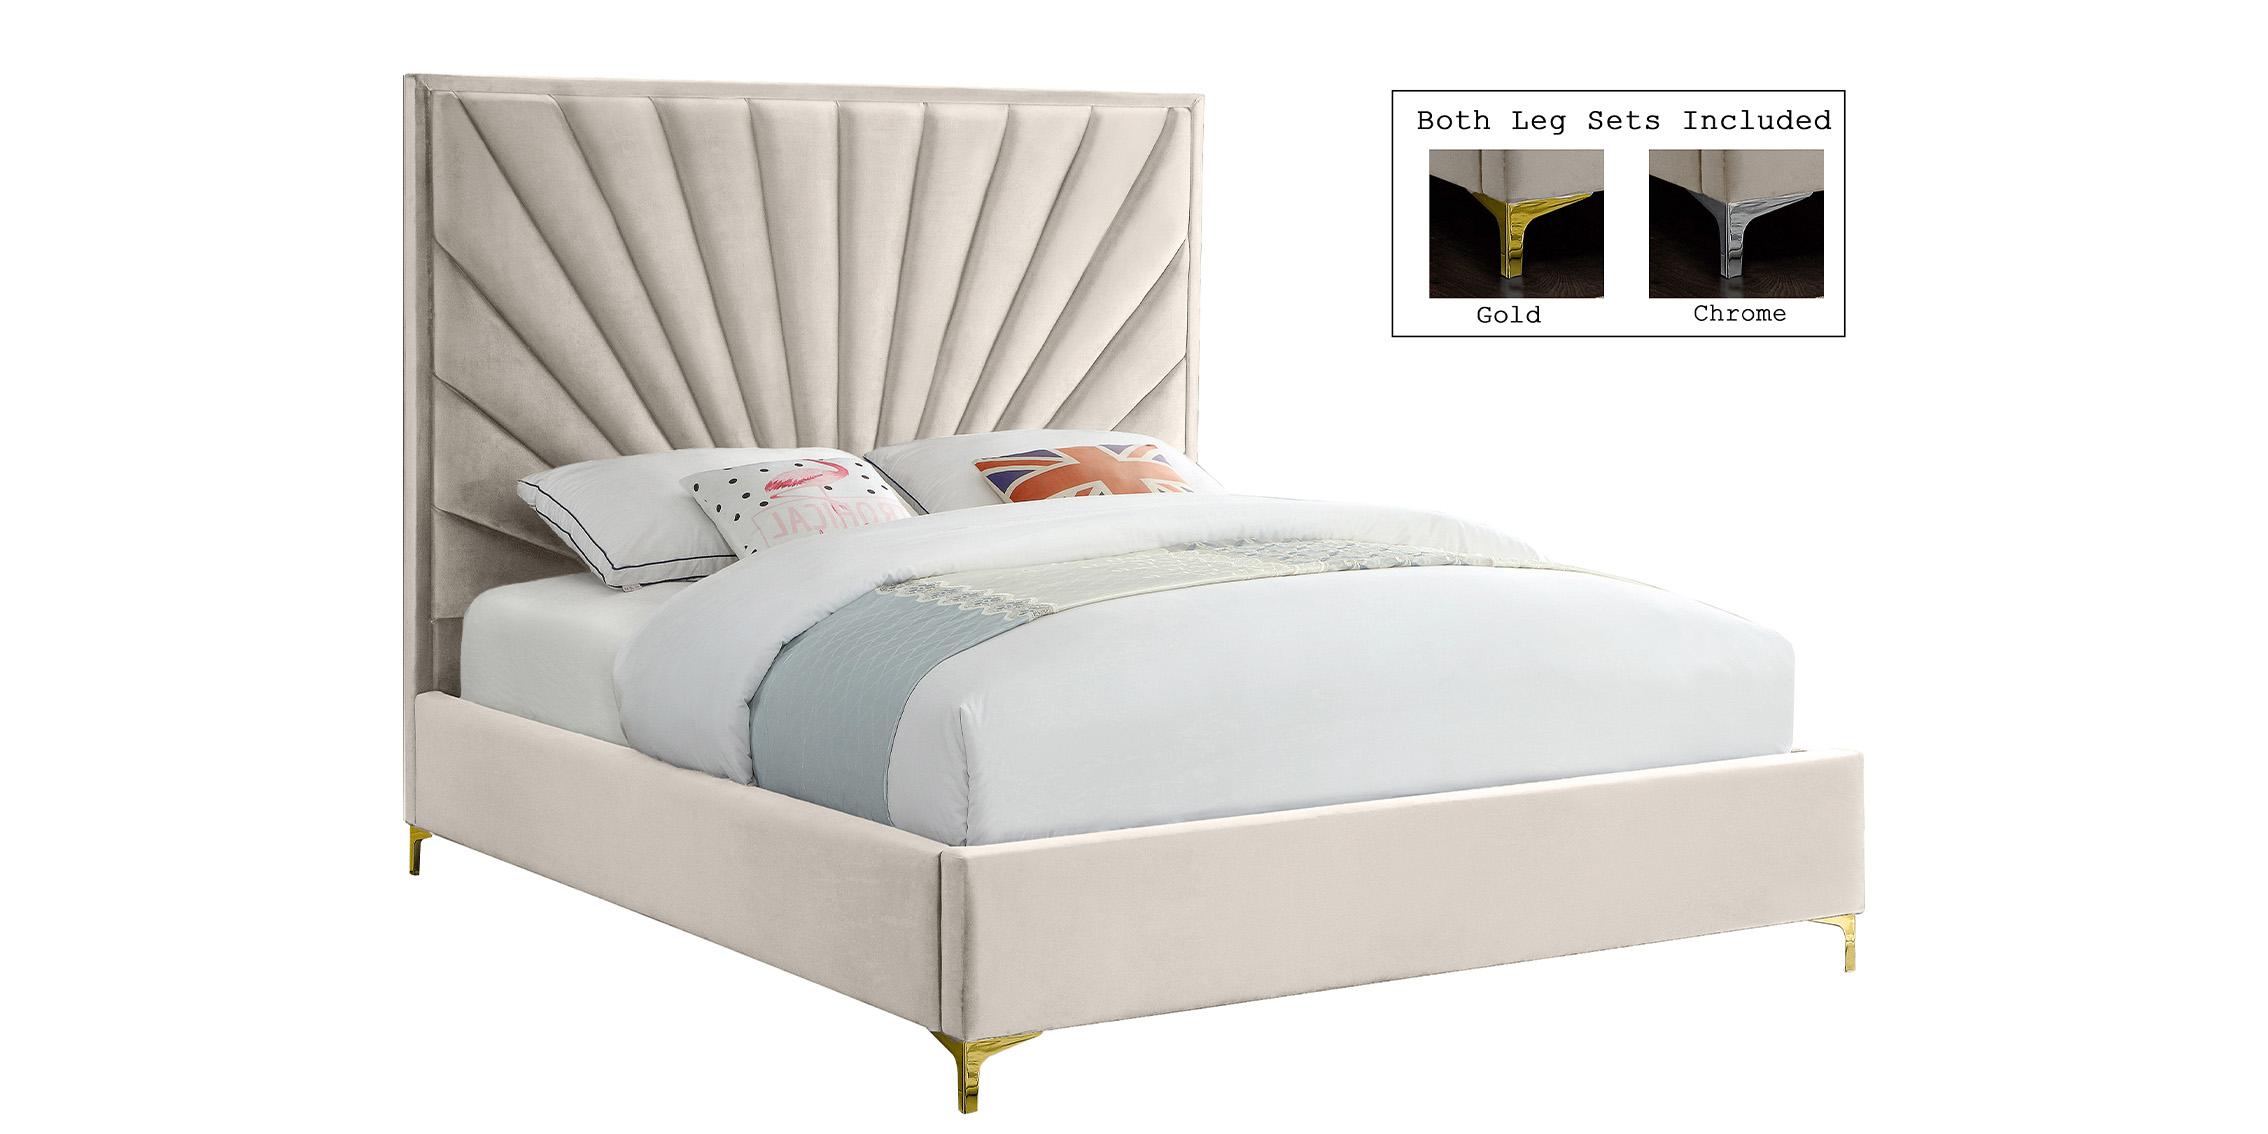 

    
Luxurious Cream Velvet Tufted King Bed ECLIPSE Meridian Contemporary Modern
